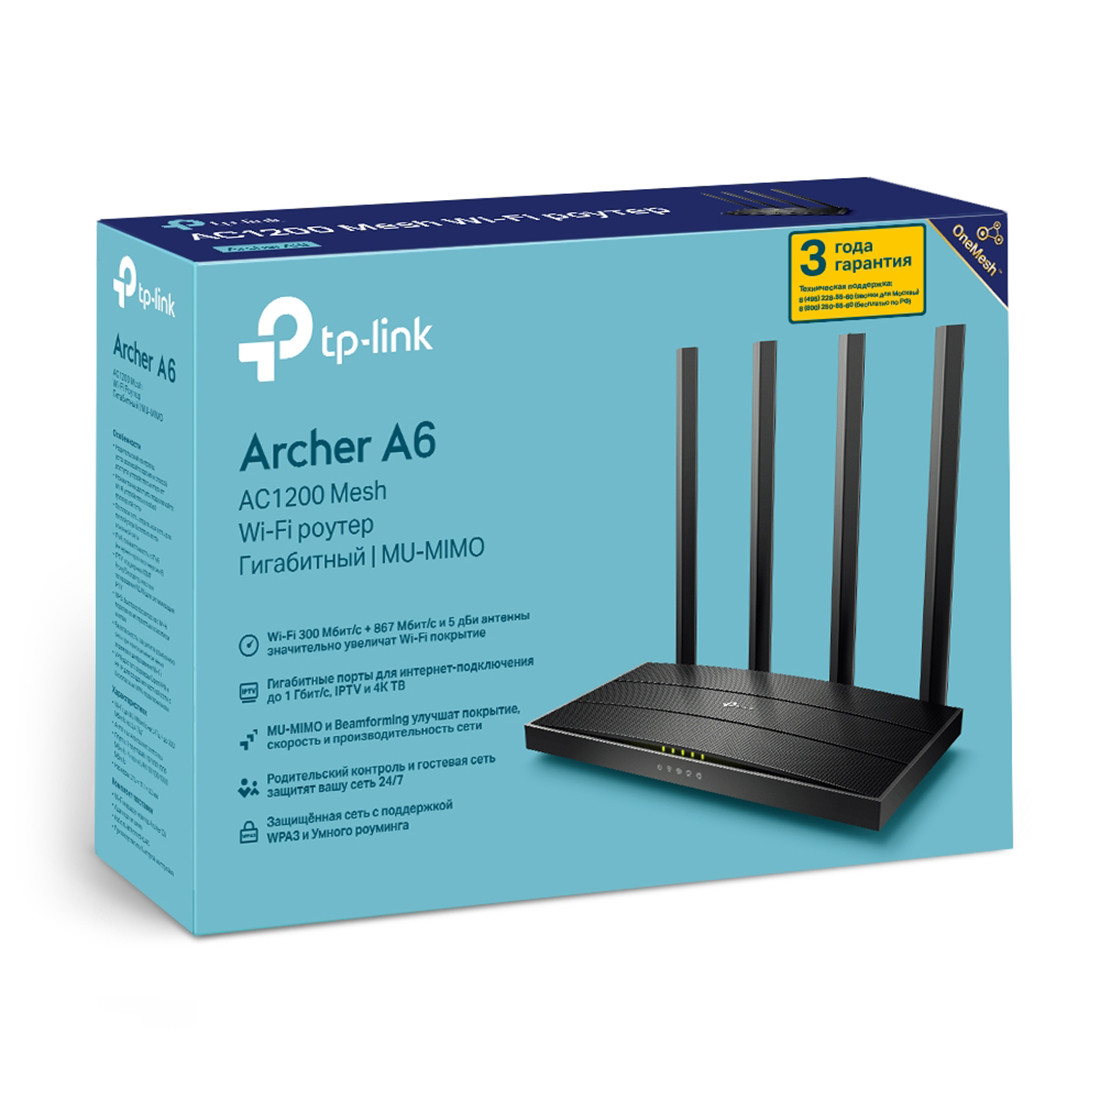 Маршрутизатор TP-Link Archer A6 - фото 3 - id-p96433131